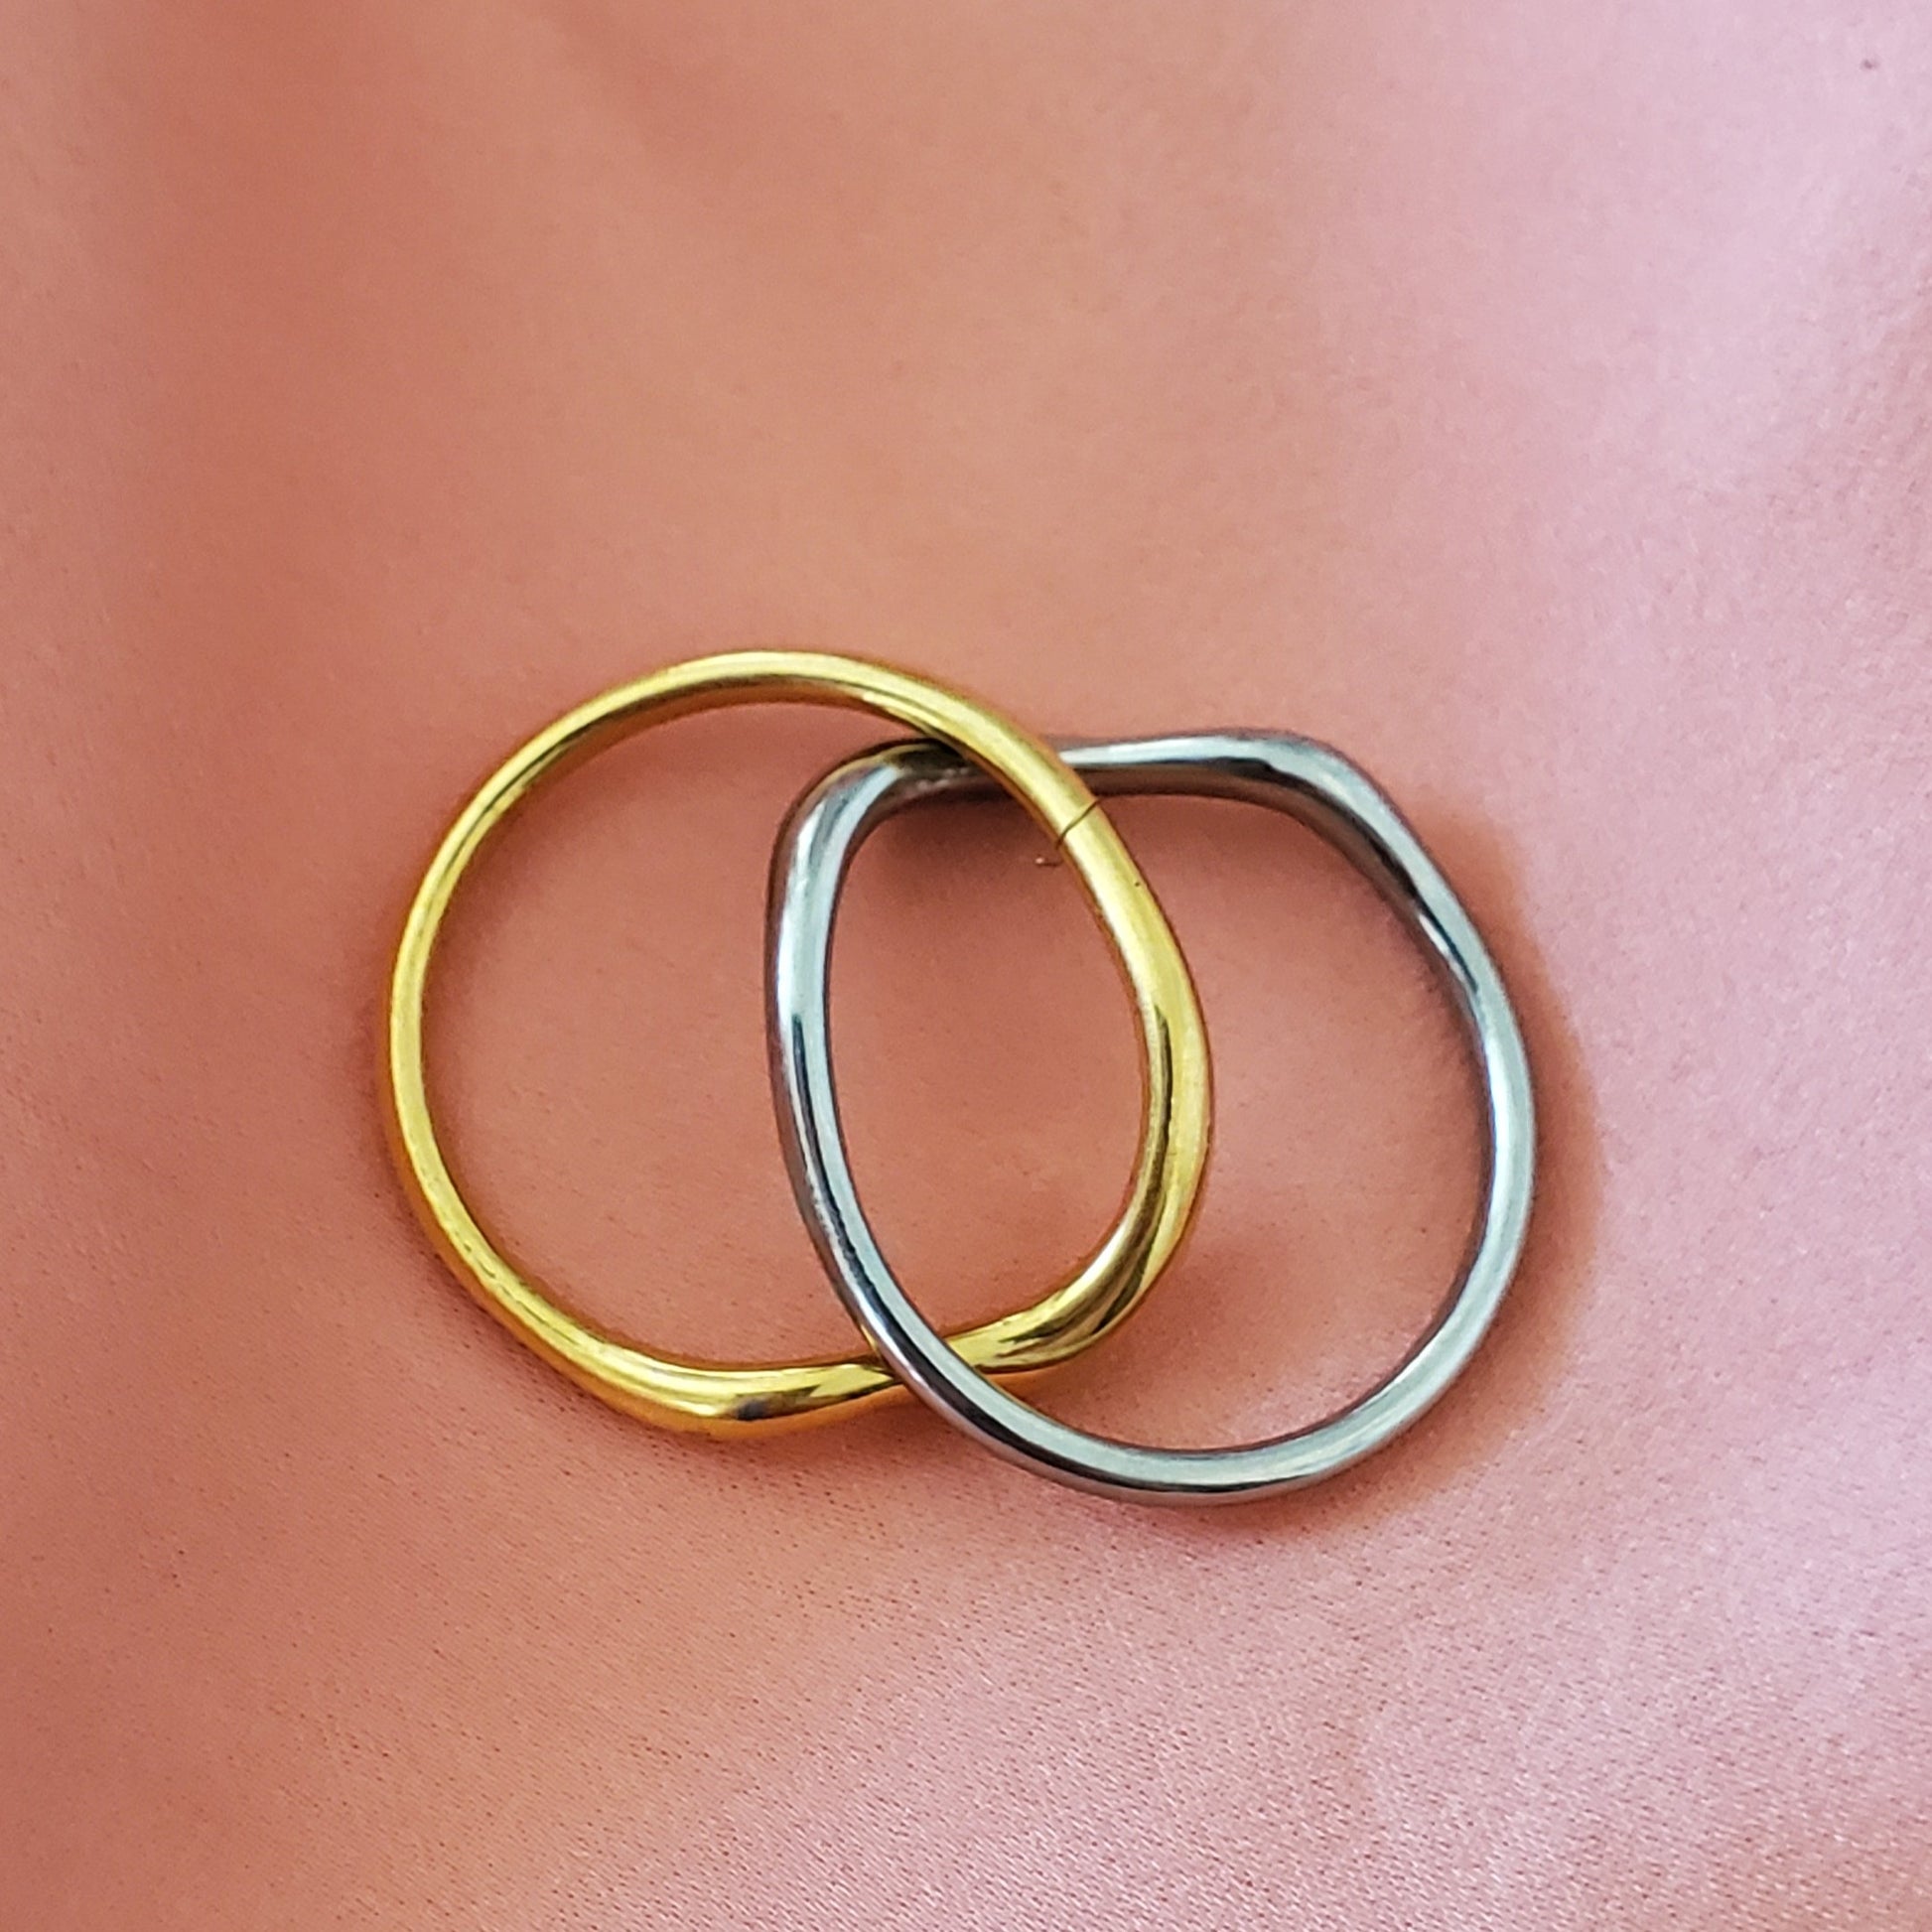 double tone rings, gold and silver rings, hello Luxy jewelry, hey harper jewelry, the views and co jewelry, ellie vail jewelry, 18k gold plated rings, 18k gold plated jewelry, water resistant jewelry, water resistant rings, tarnish free rings, endless love rings, couple rings, sisterhood rings, best friend rings, sisters rings, best friends gift, sister gift, wife gift, promise rings, classy double tone rings, interlocking rings, lightweight silver and gold rings